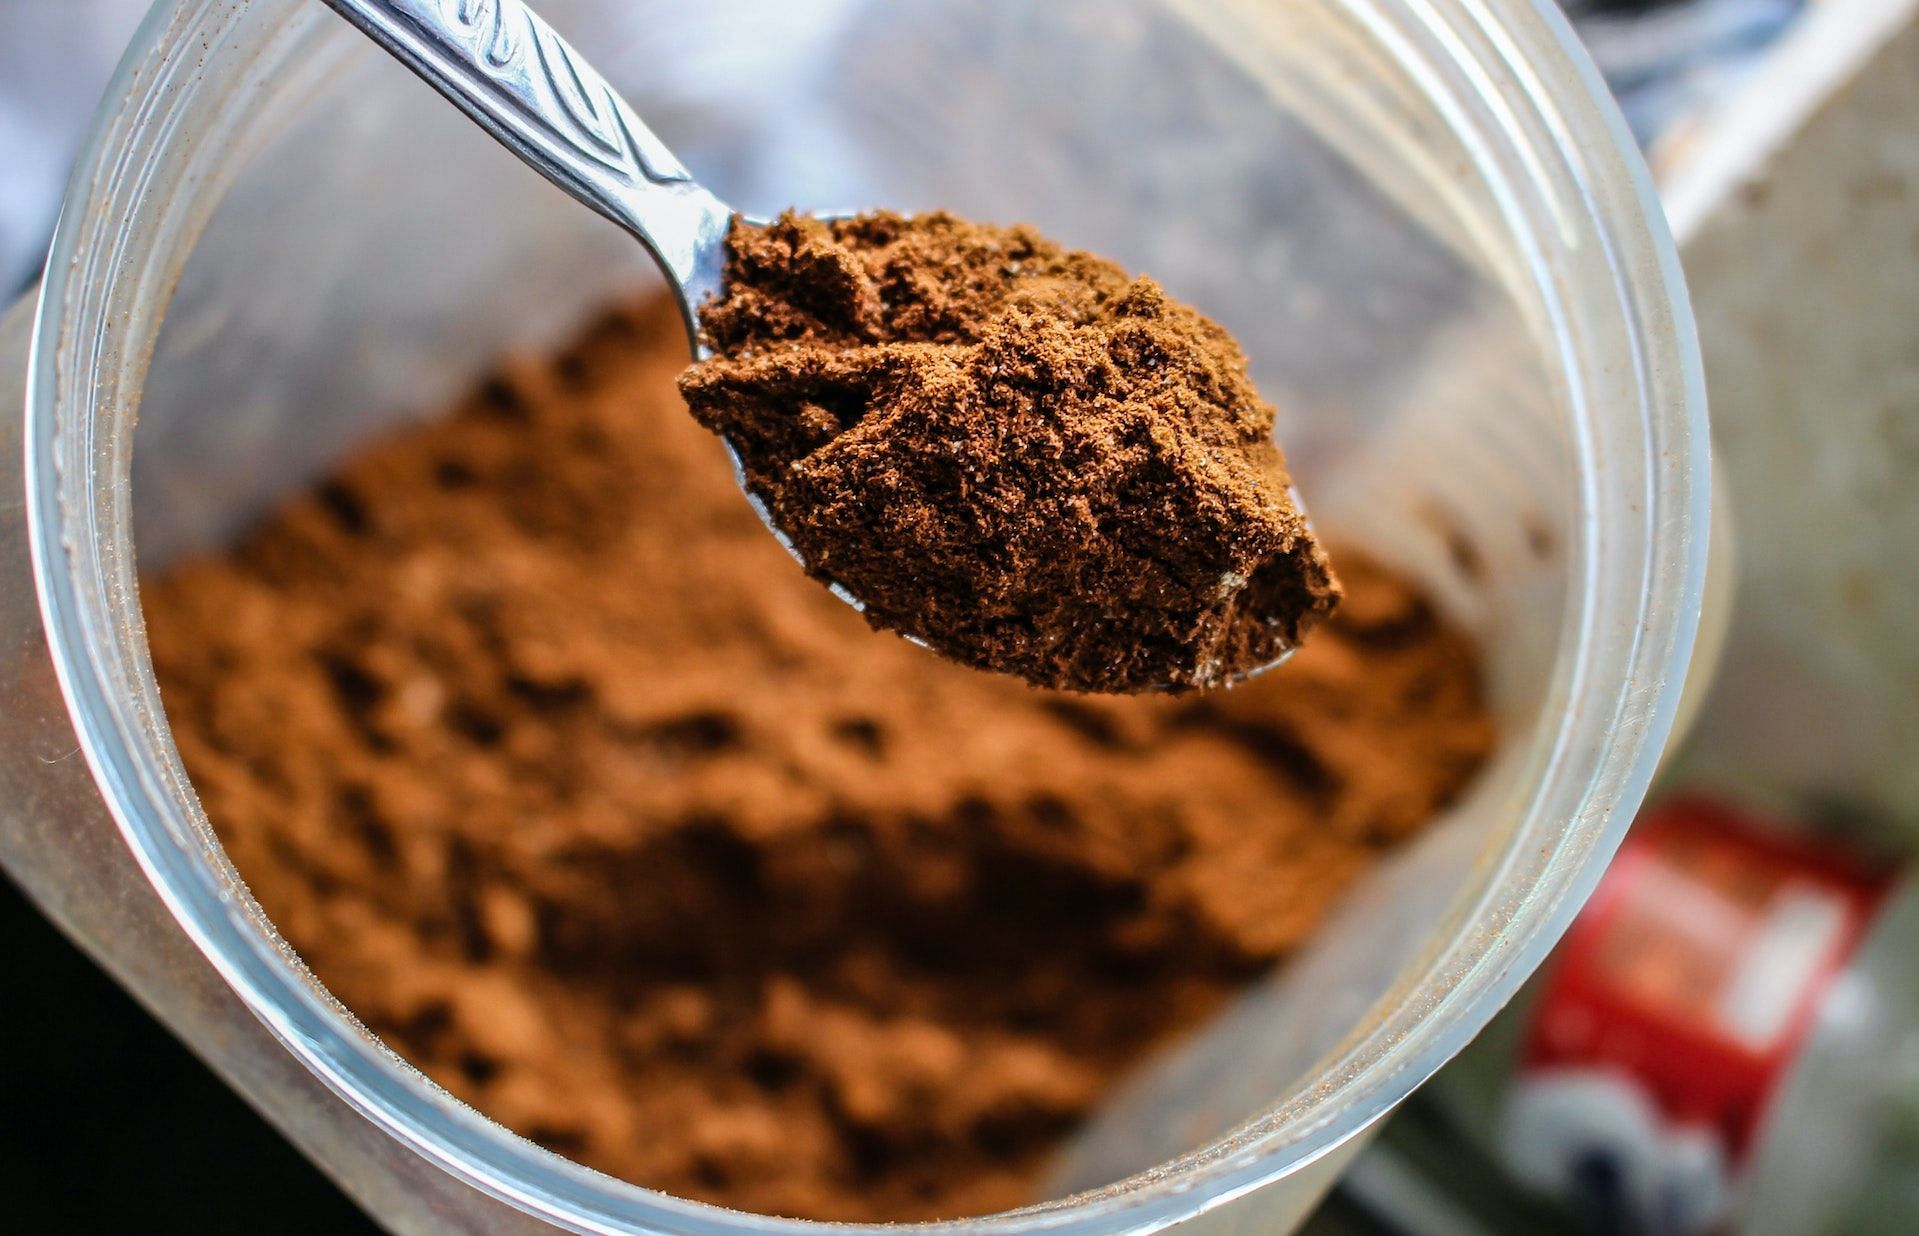 Cacao powder improves cognitive functions. (Photo via Pexels/Delphine Hourlay)